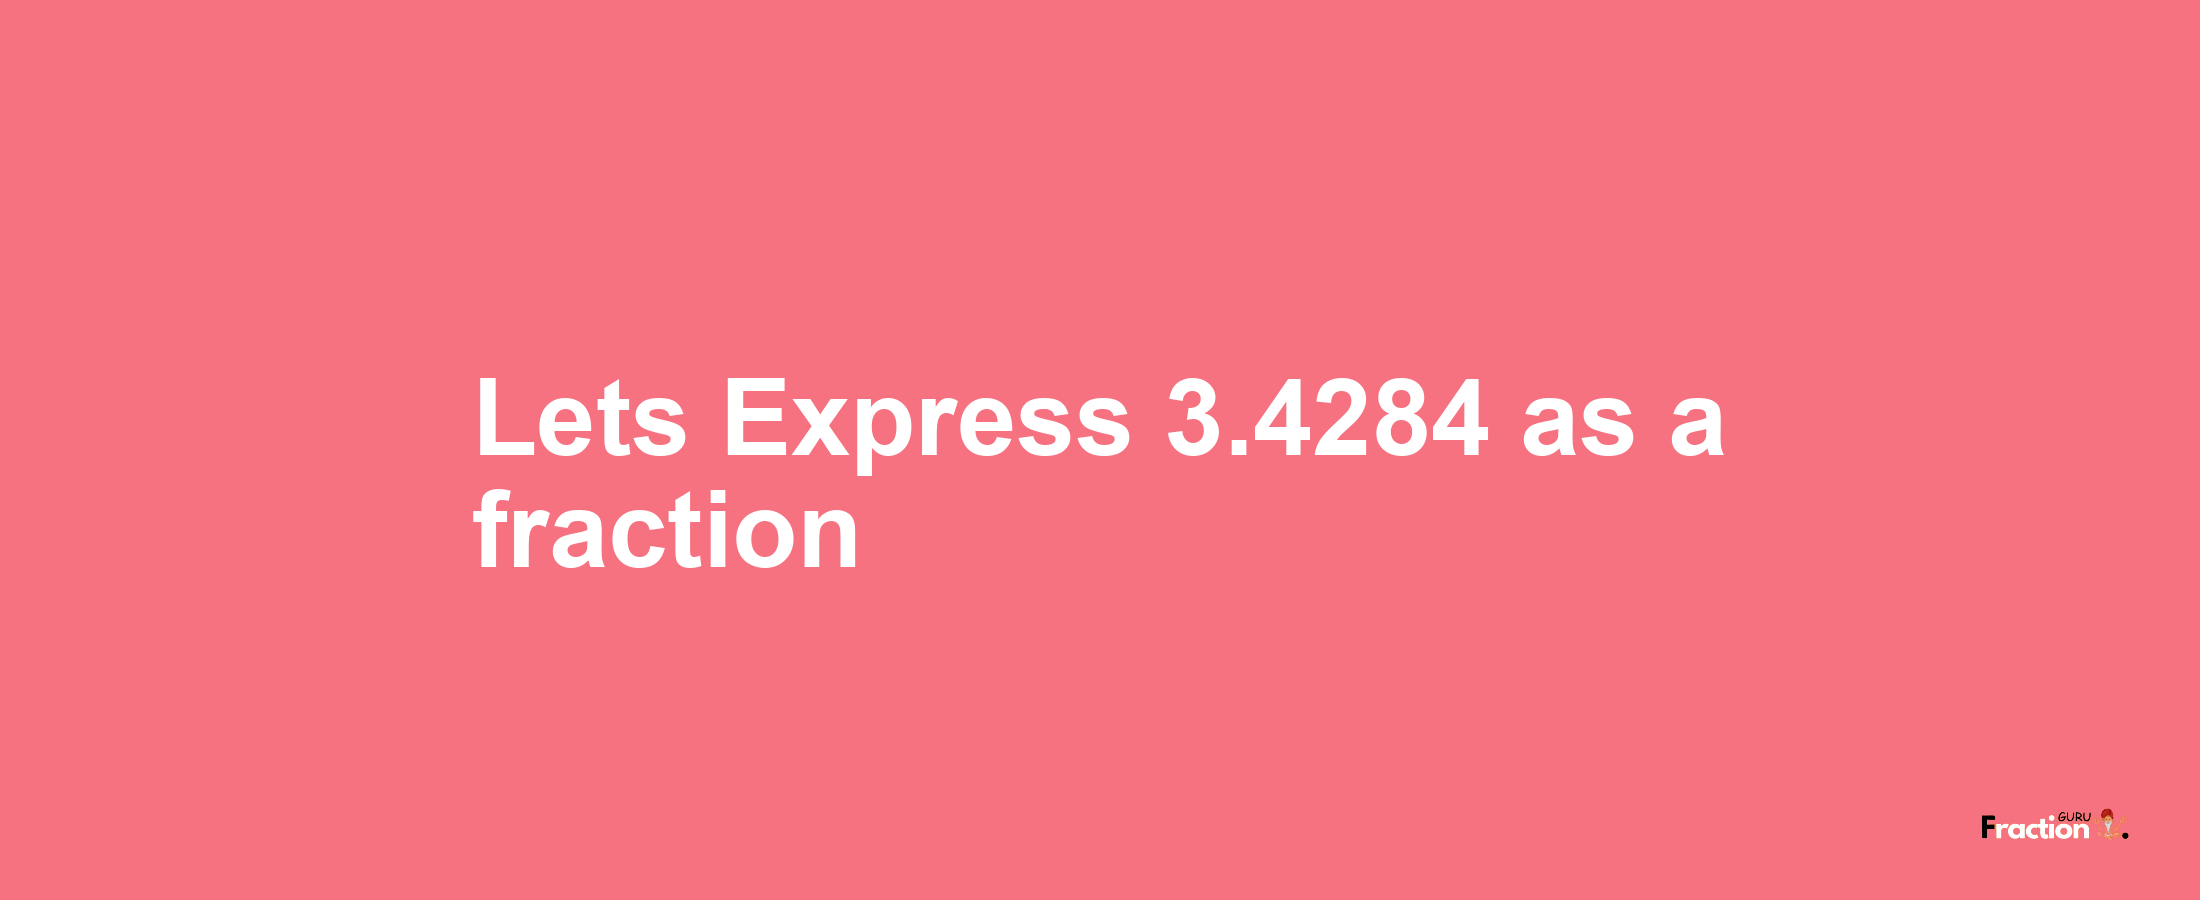 Lets Express 3.4284 as afraction